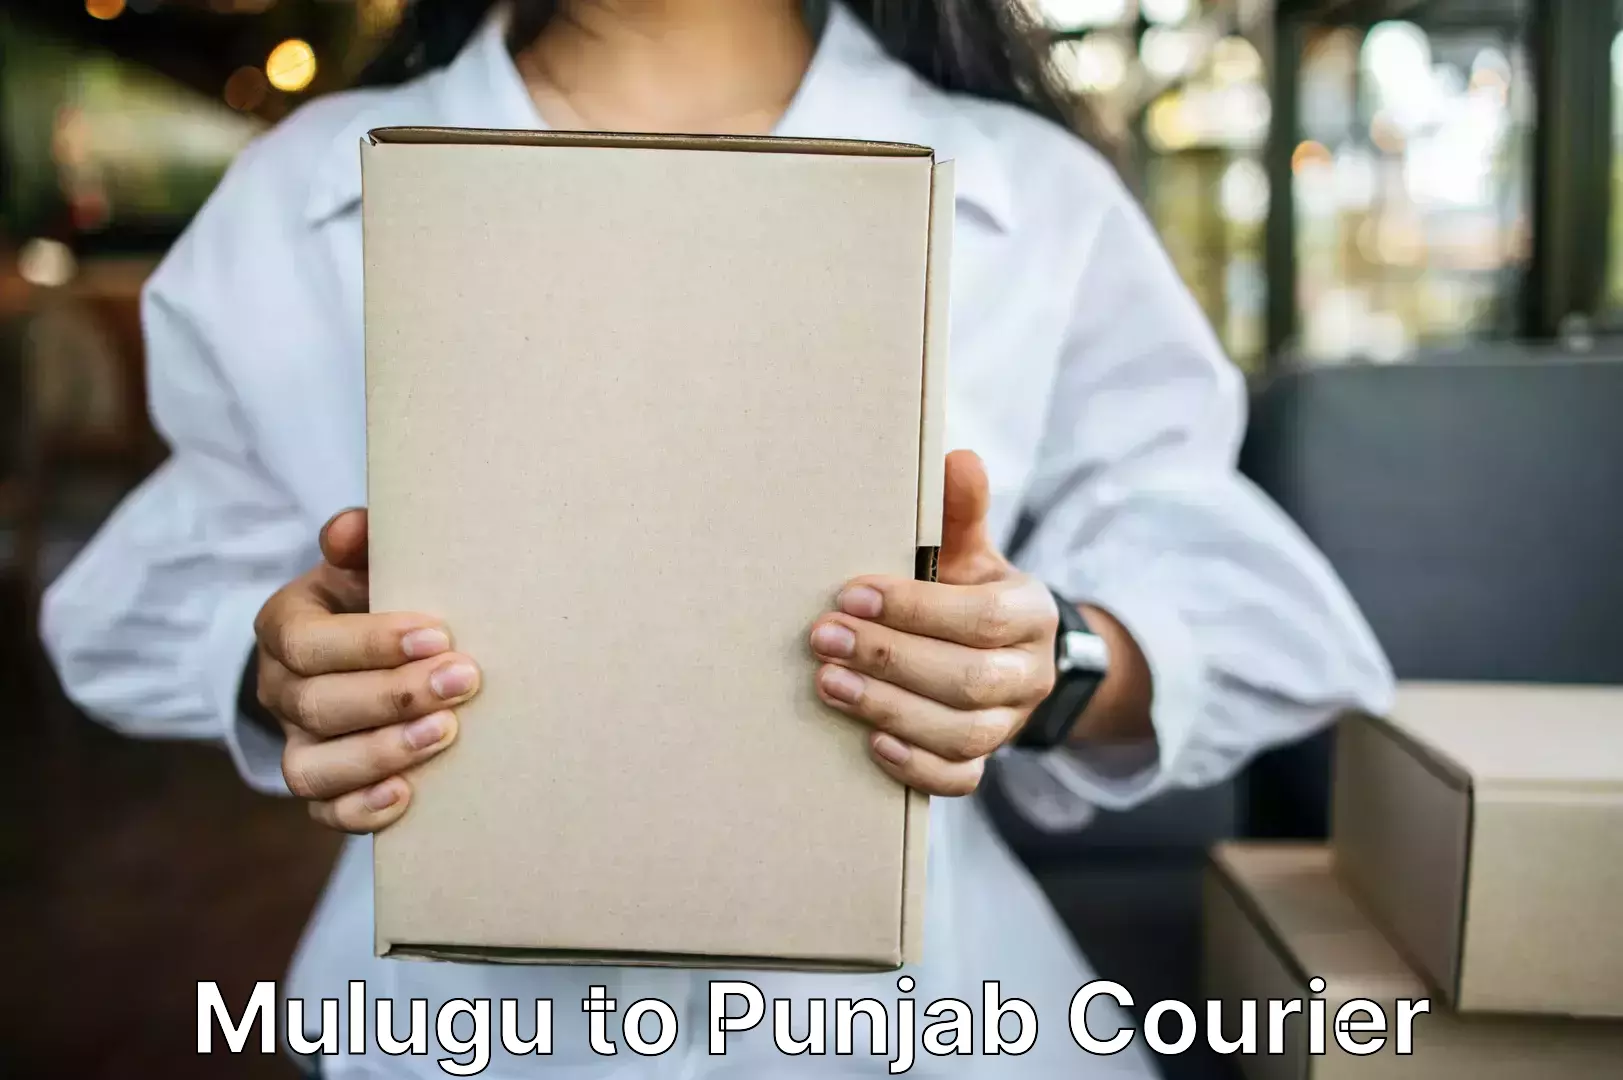 Luggage delivery app Mulugu to Ludhiana